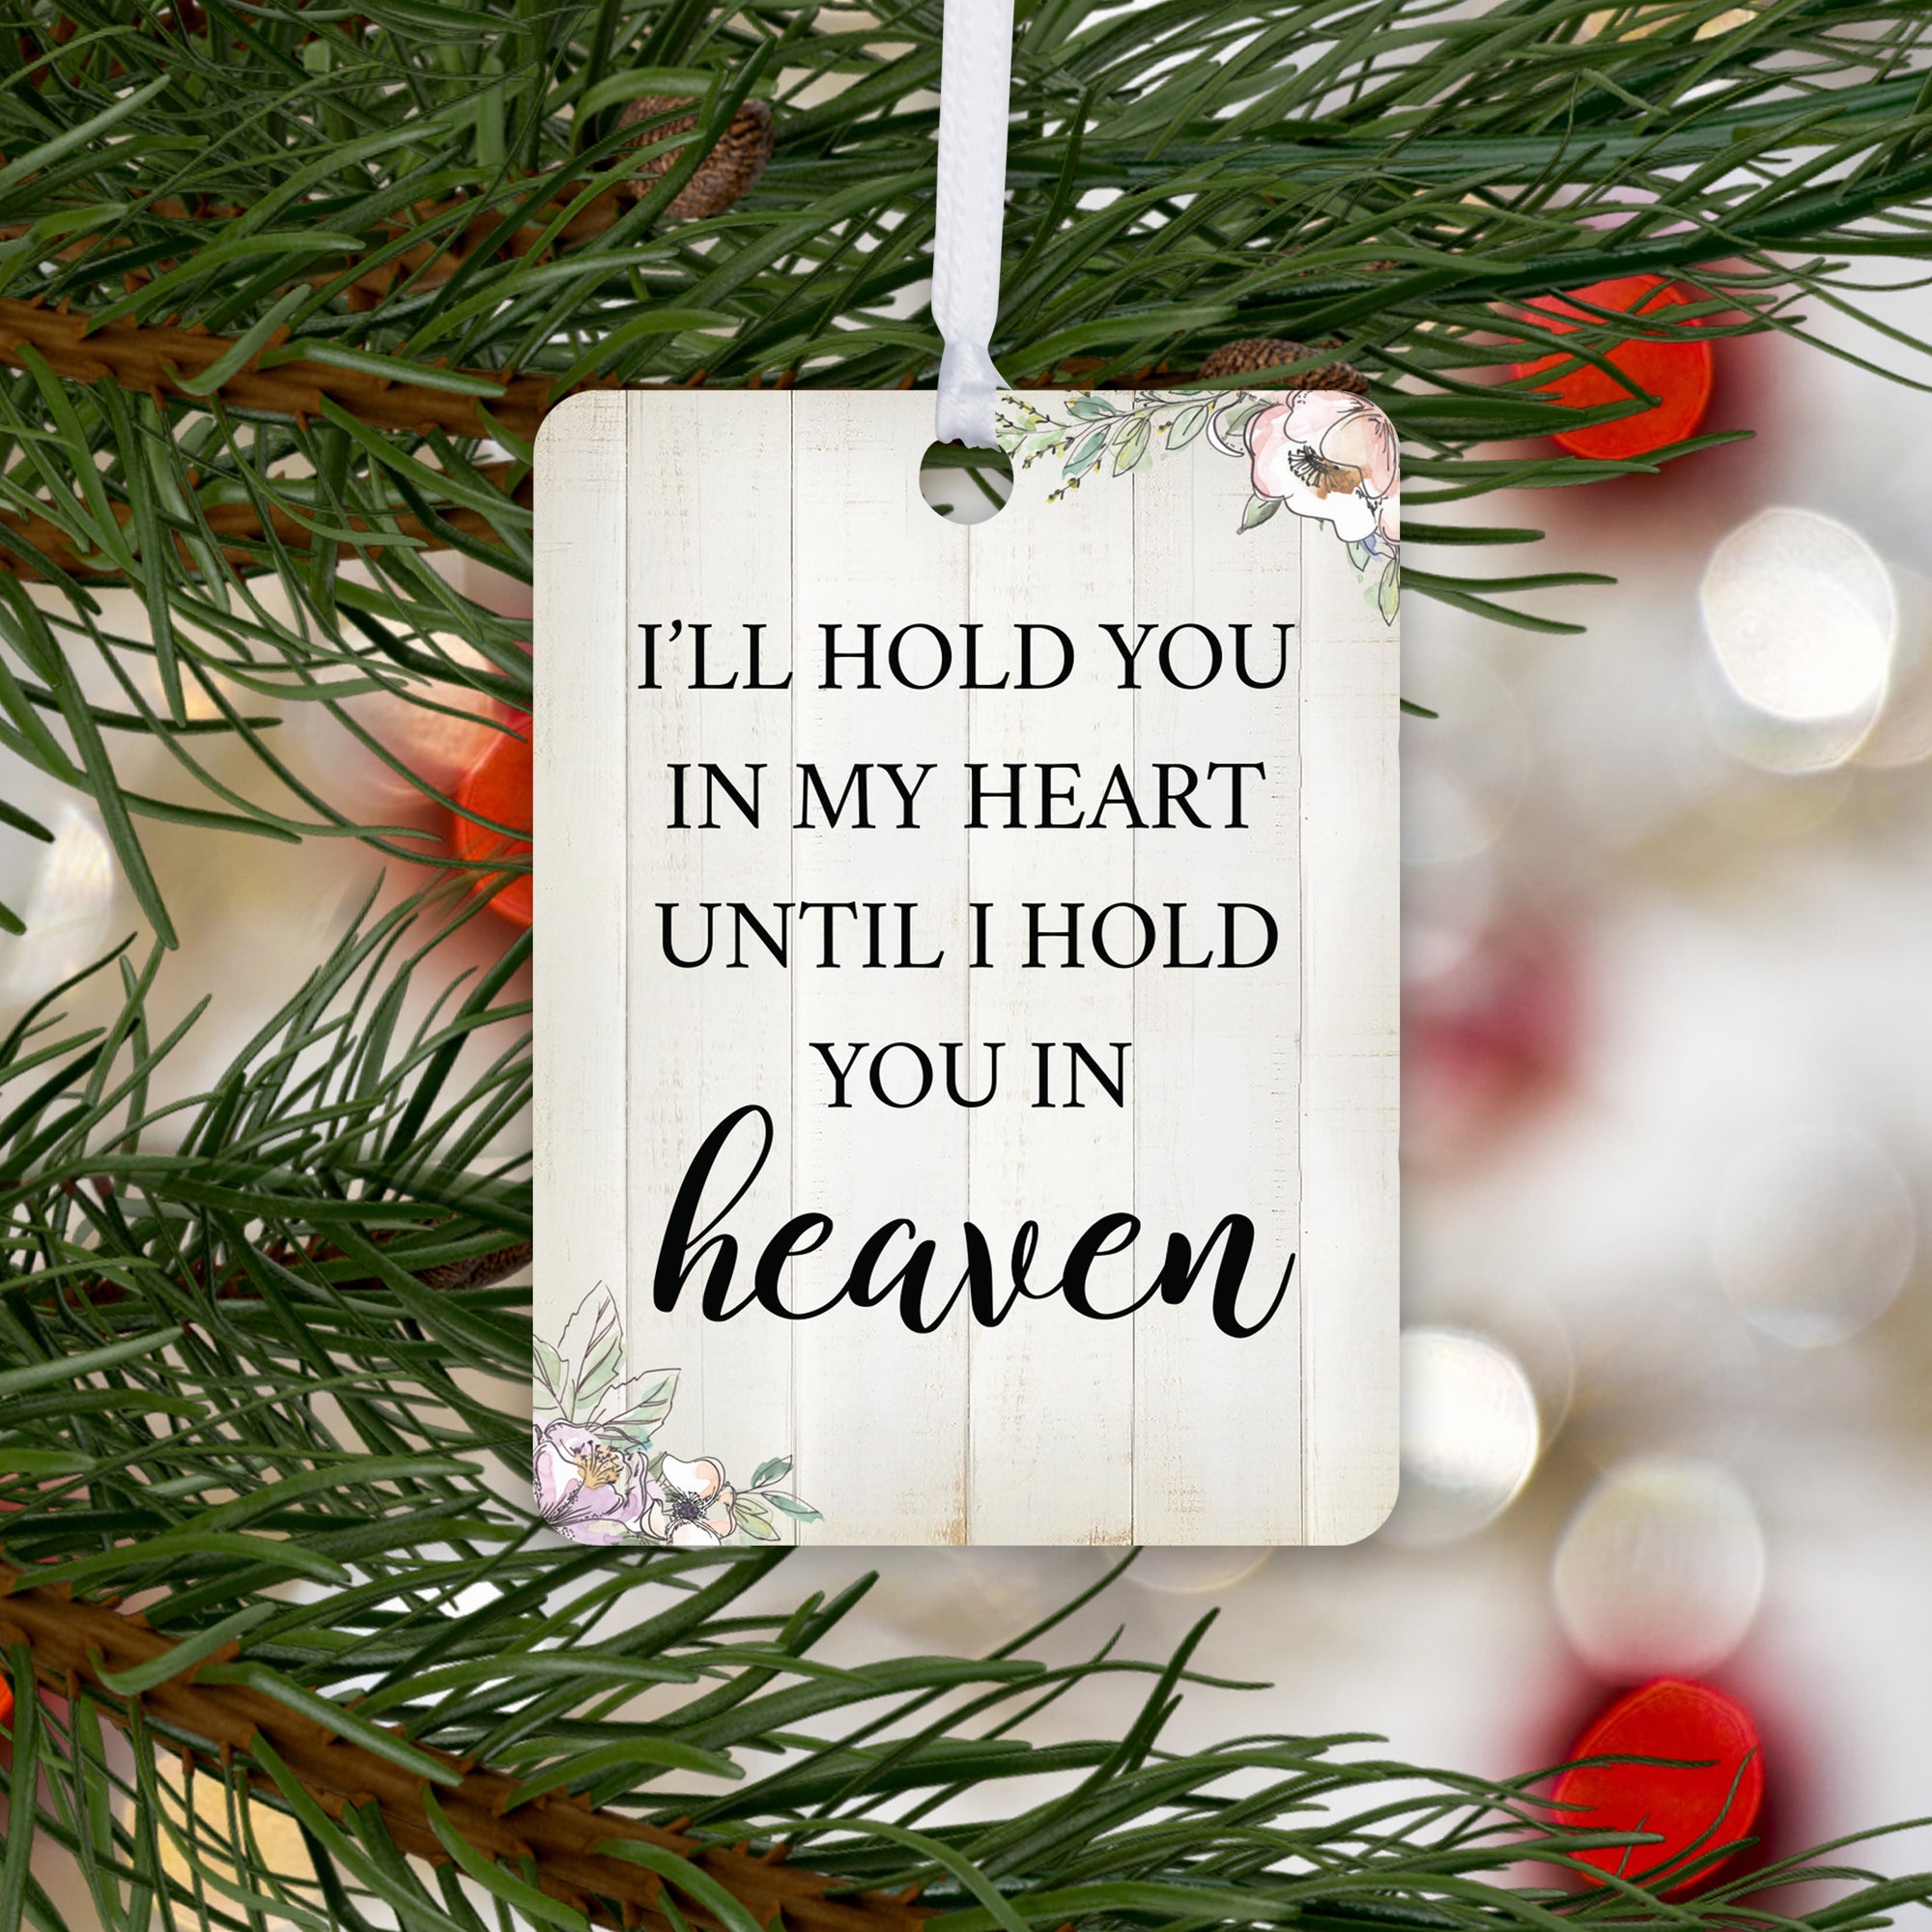 An elegant hanging ornament featuring a heartfelt tribute to a loved one – Loved One Memorial Gifts.